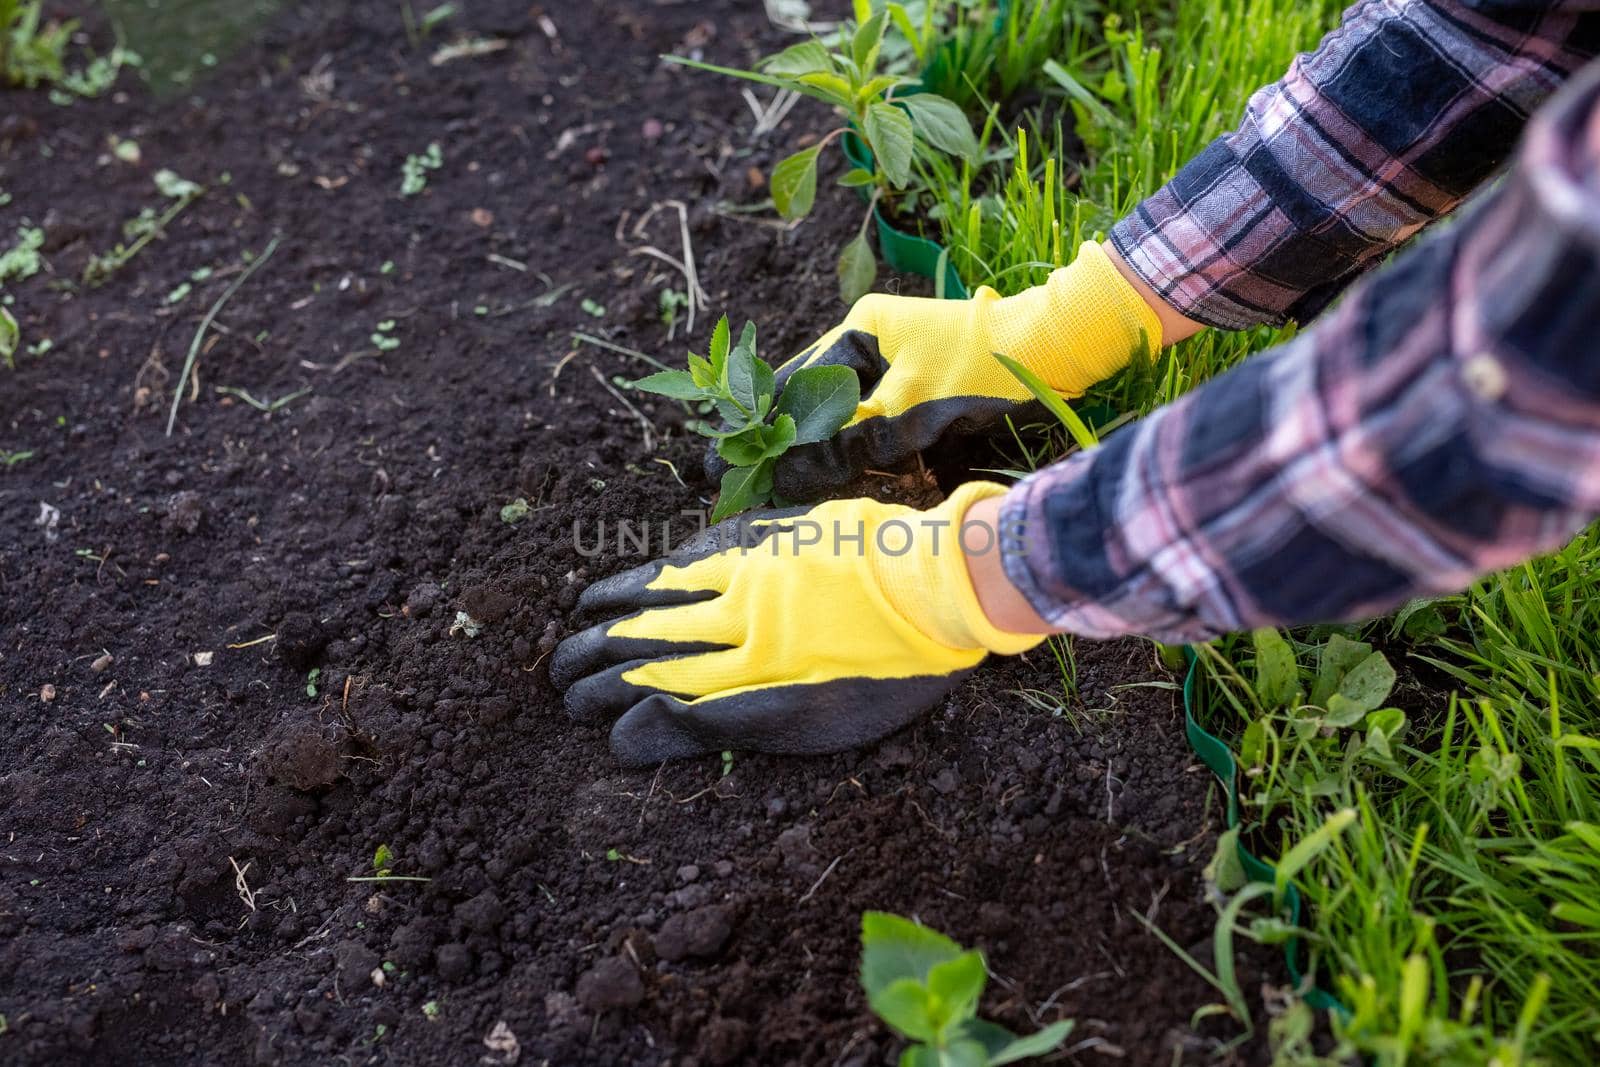 The hands of woman gardener in gloves plant seedling of small oak trees in the ground.